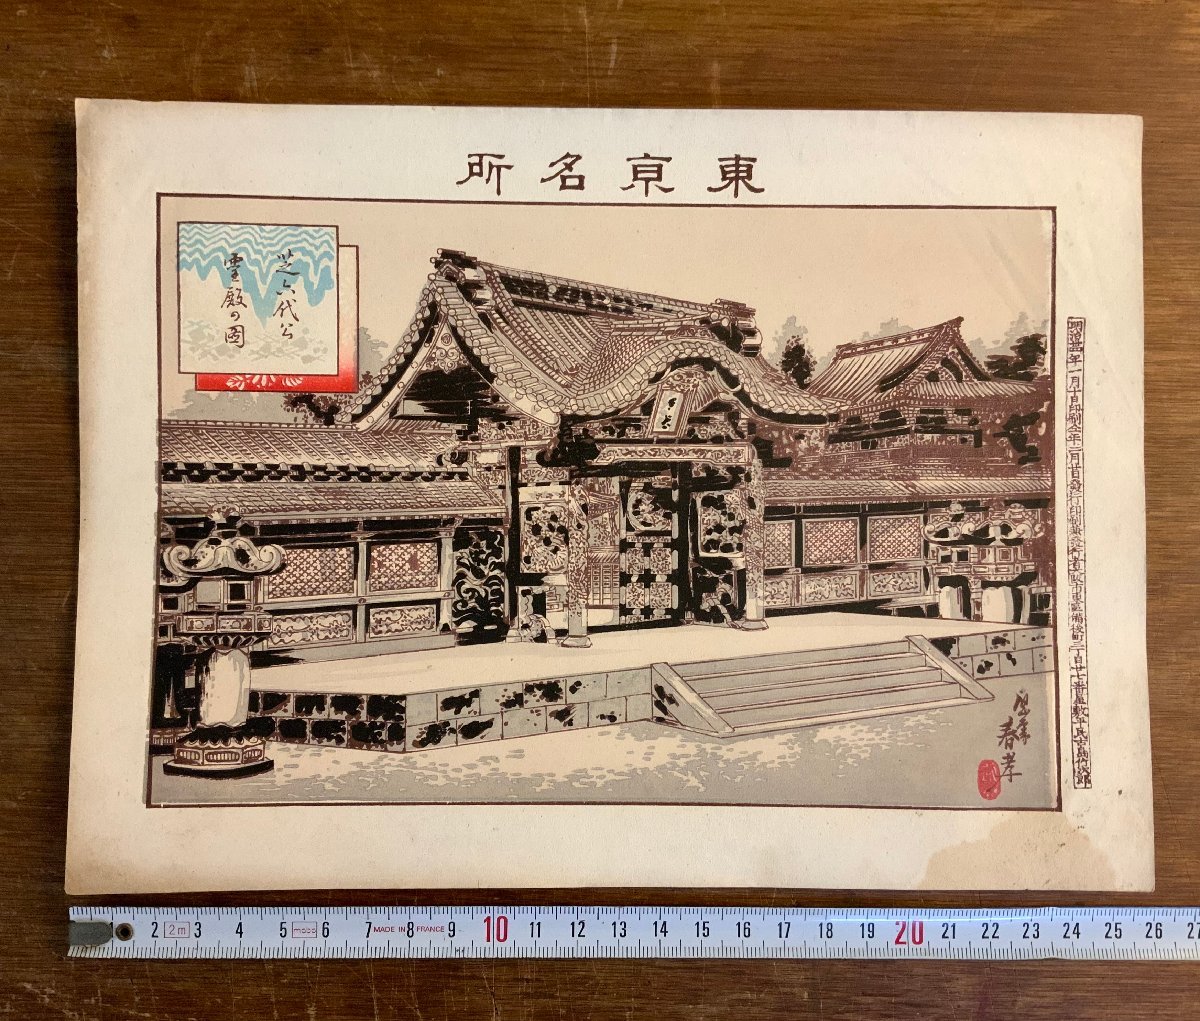 LL-6960 ■Shipping included■ Famous places in Tokyo: Scenery of the Shiba Rokudai Koseiden (Sacred Shrine of the Six Emperors) Meiji 34, by Harutaka Hirose, Fuusai, Takejiro Furushima, lithograph, ukiyo-e, painting, old book, ancient document /KuJYra, Artwork, Prints, Lithography, Lithograph